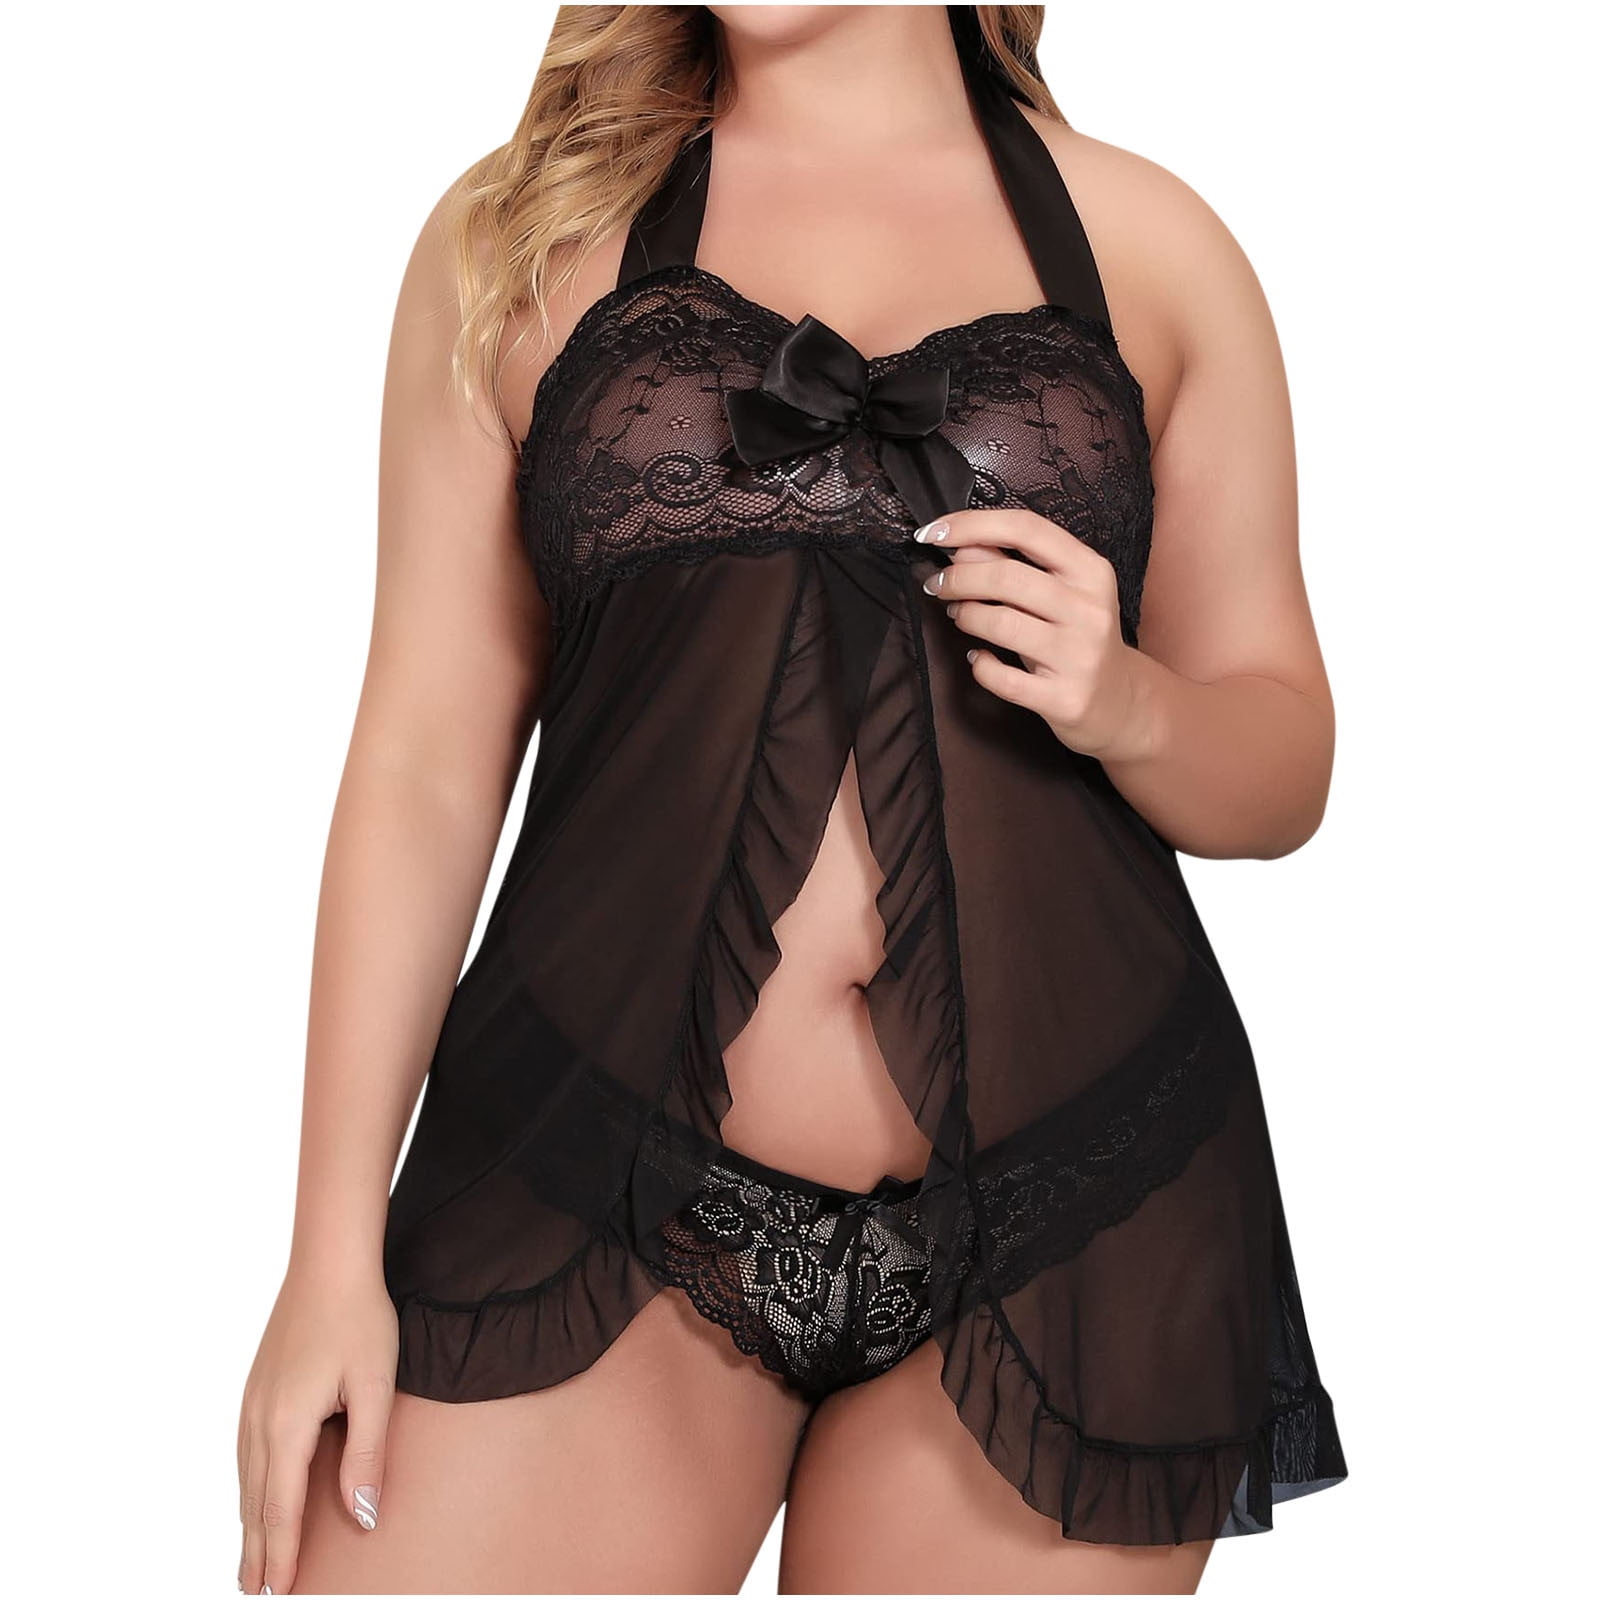 Plus Size Halter Lace Lingerie Set For Women Sexy Black Lace Bra And Panties,  Perfect For Erotic Nights Available In Sizes 3XL 5XL Sleepwear1222z From  Eqzhi, $26.88